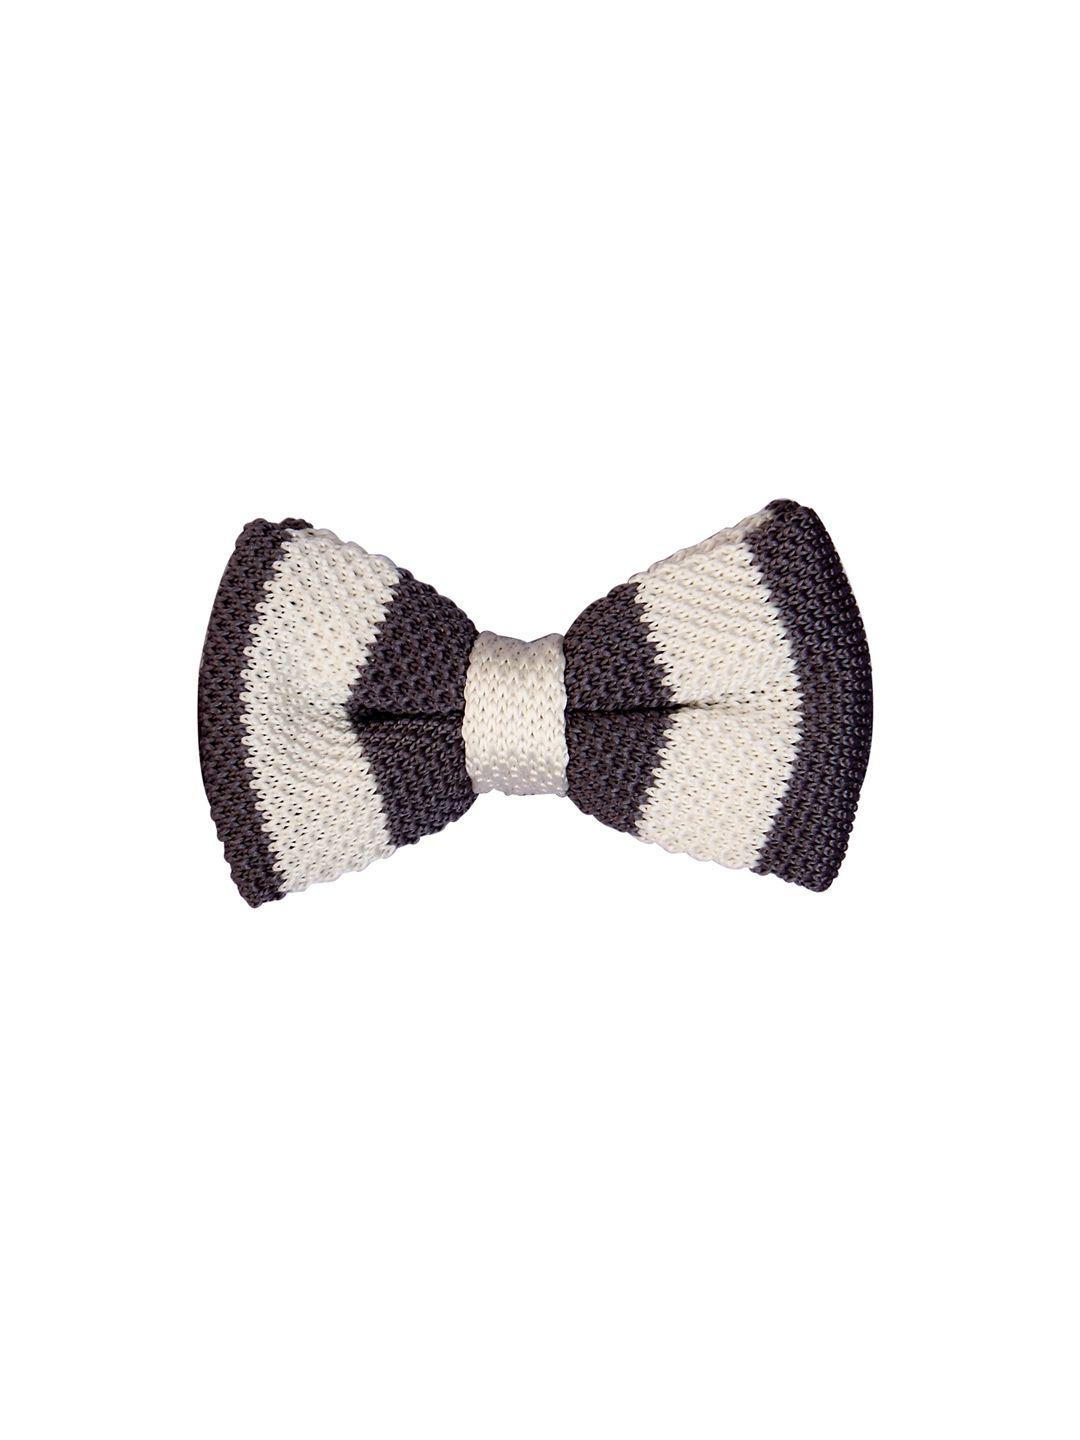 tossido white & black knitted striped bow tie